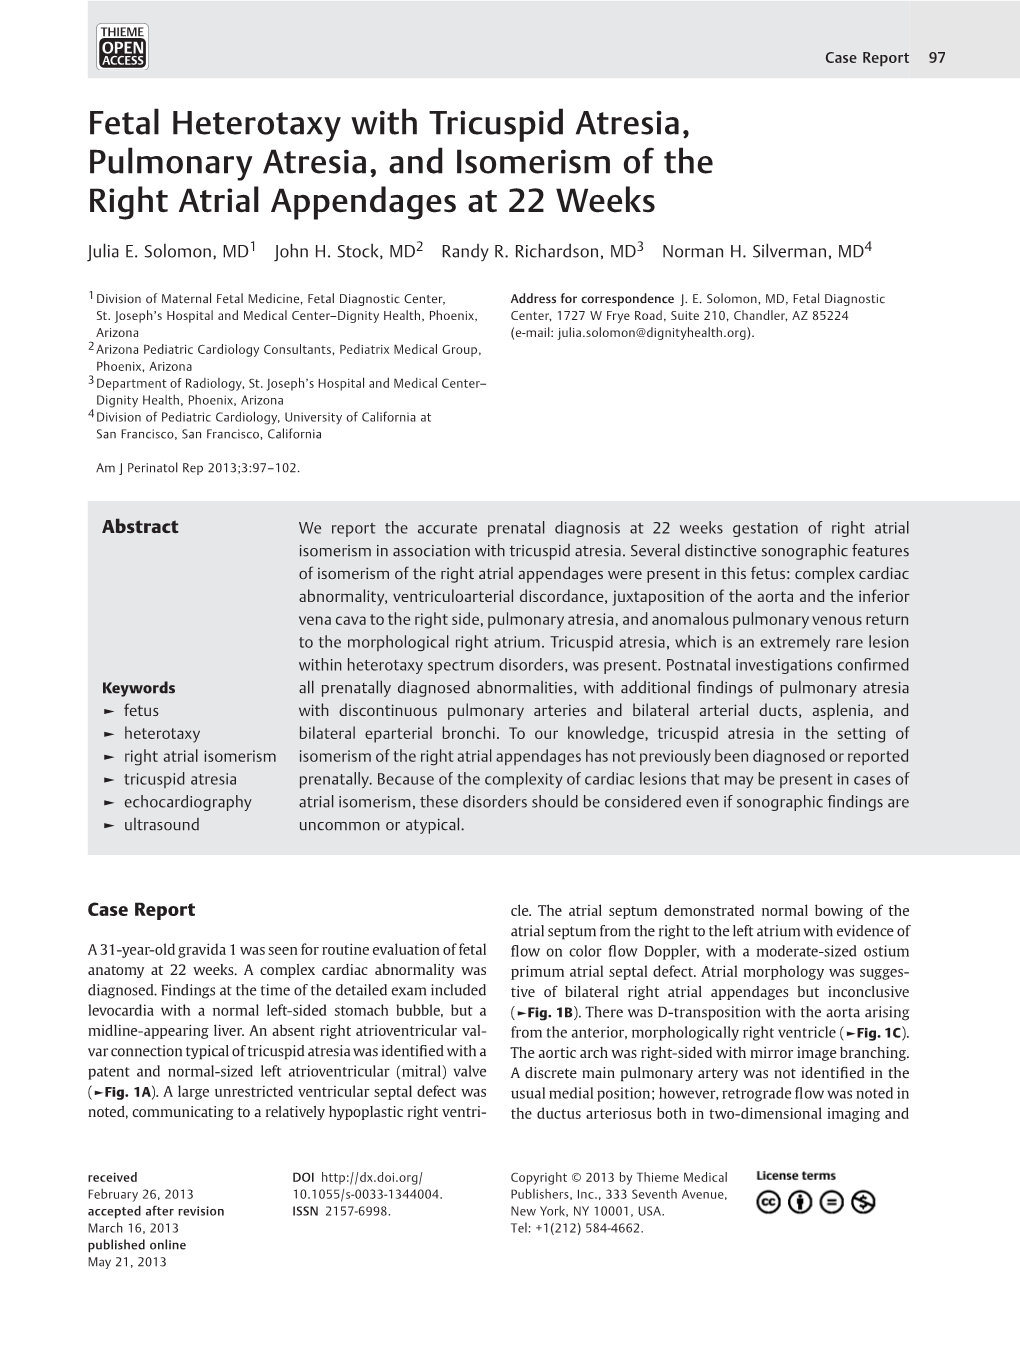 Fetal Heterotaxy with Tricuspid Atresia, Pulmonary Atresia, and Isomerism of the Right Atrial Appendages at 22 Weeks